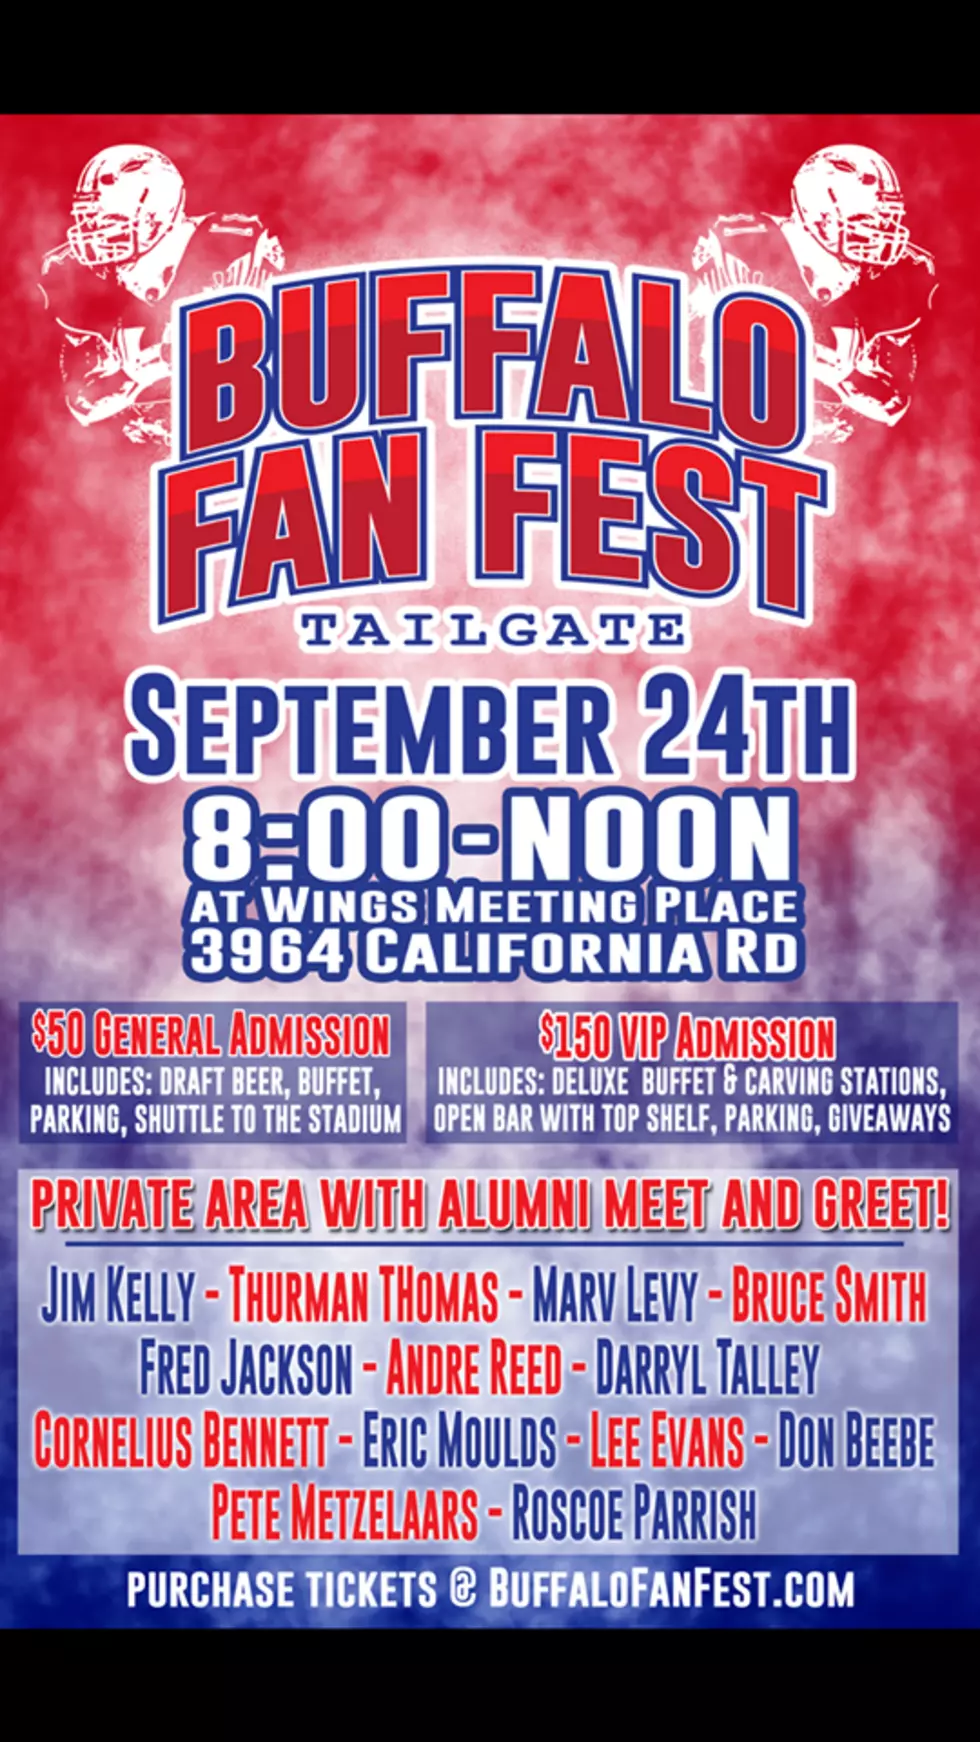 This Looks Like A Riot! The Buffalo Bills Fan Fest Is Happening Before The Game On Sunday!